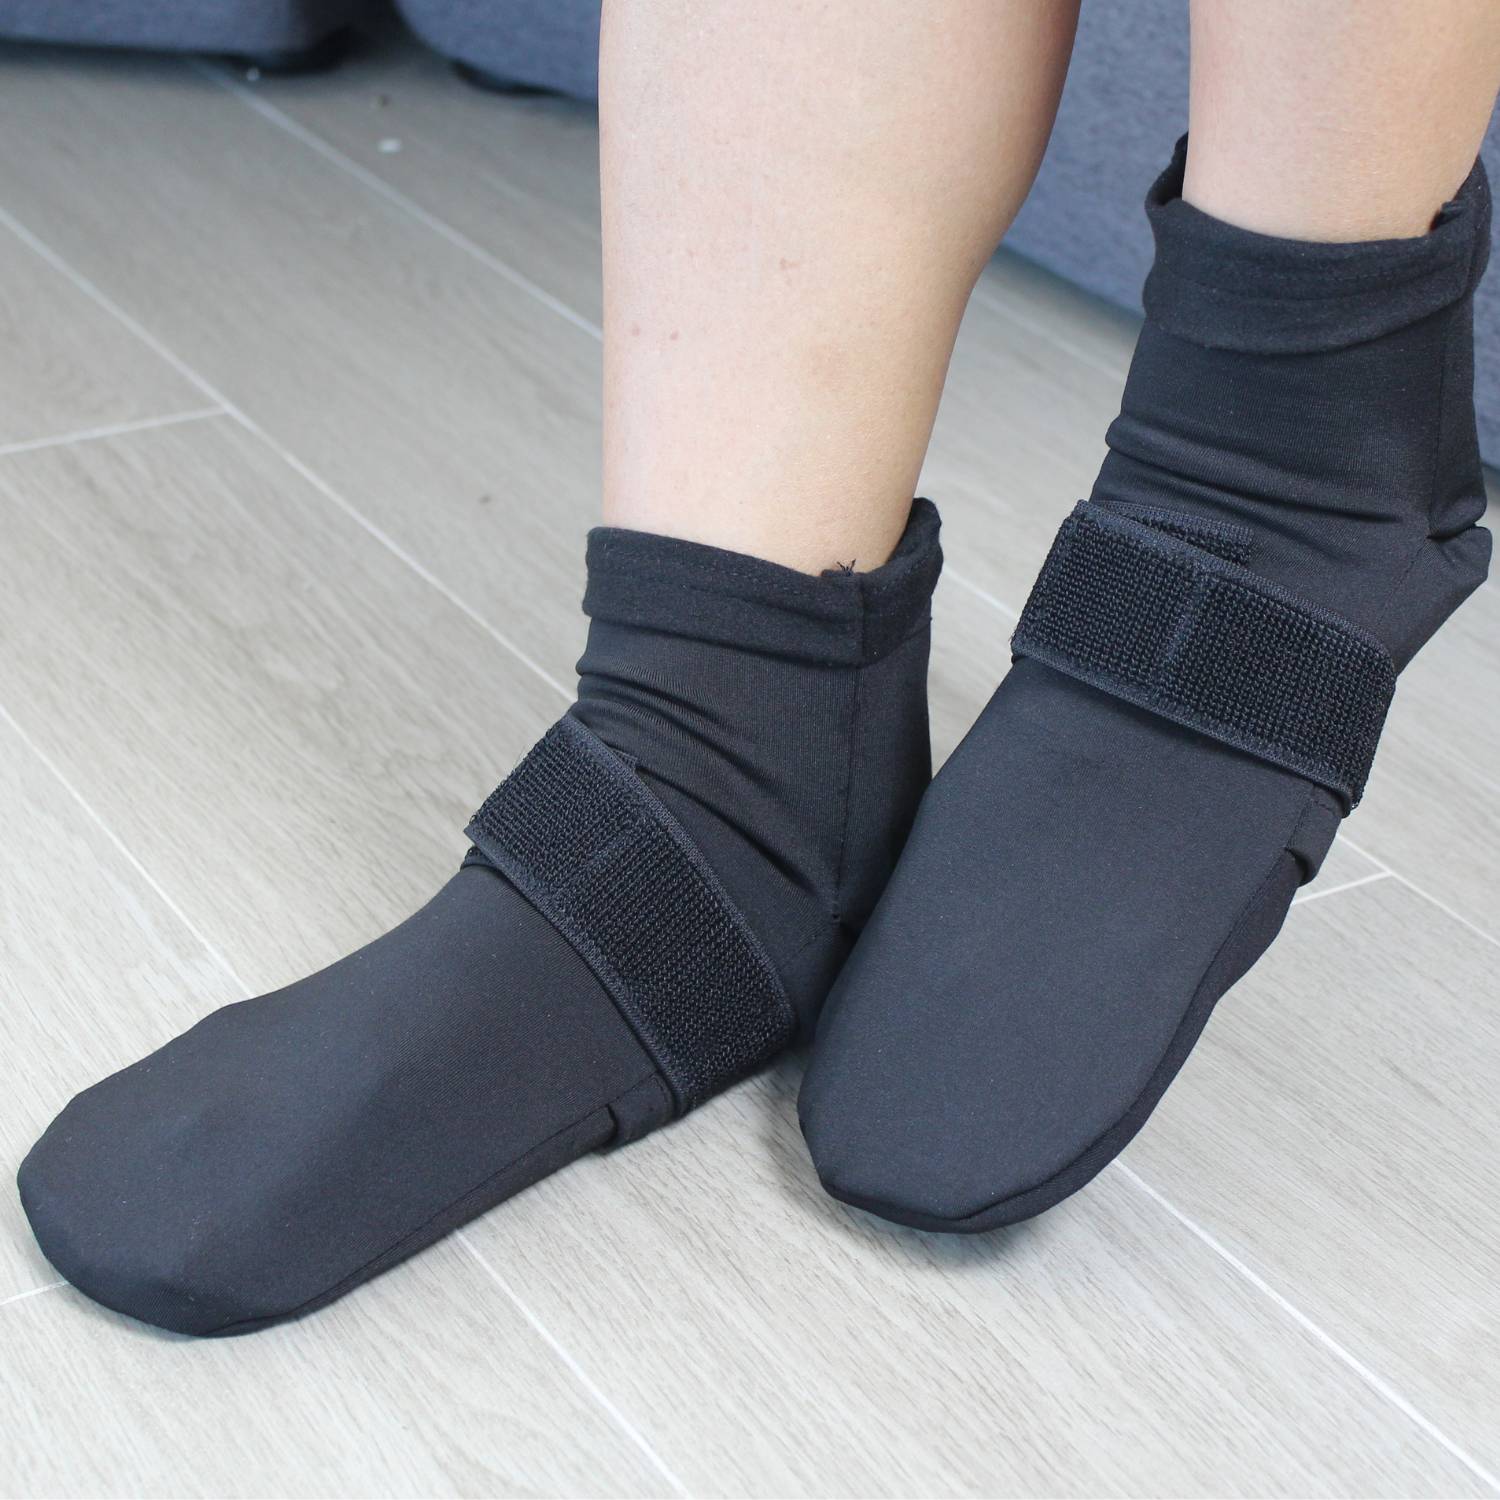 buy cold therapy socks for chemo